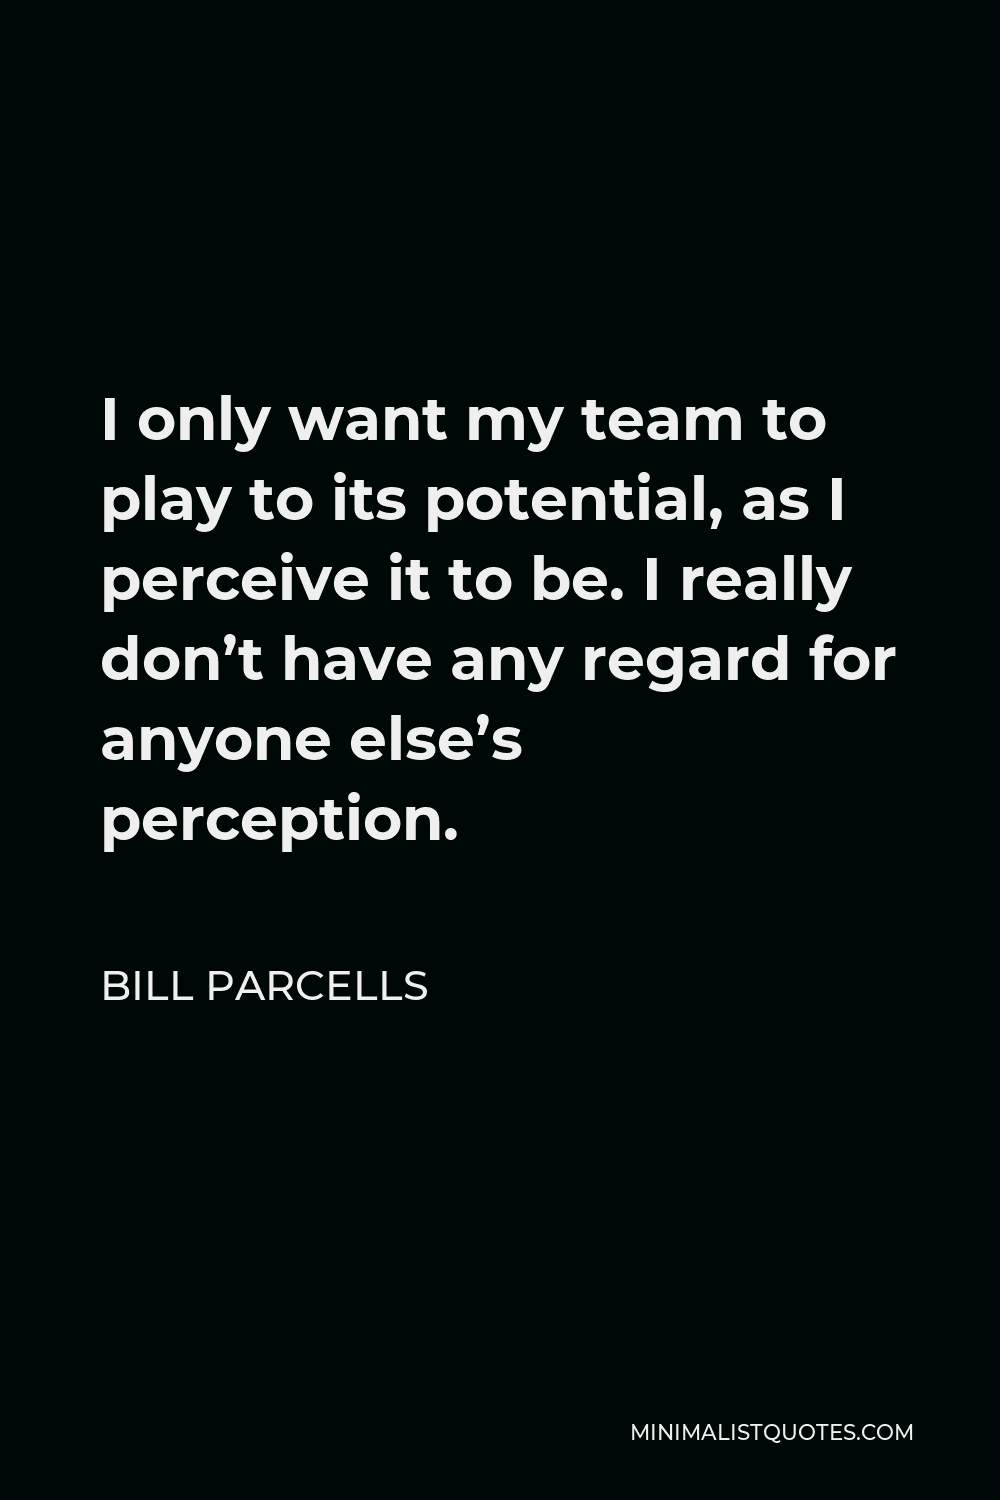 Bill Parcells Quote - I only want my team to play to its potential, as I perceive it to be. I really don’t have any regard for anyone else’s perception.